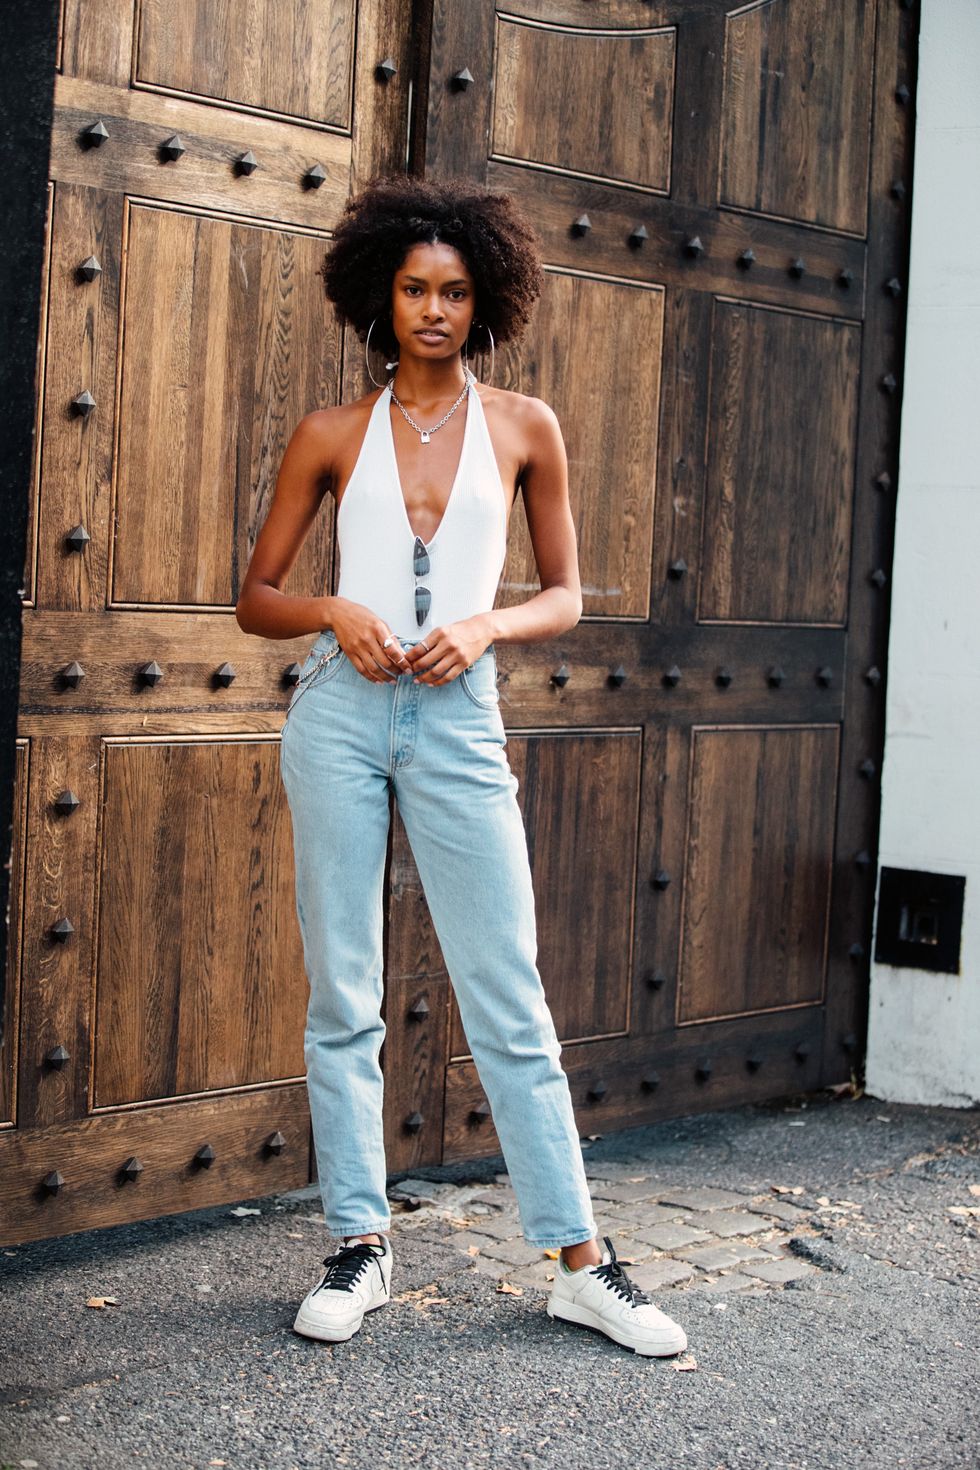 18 halter top outfit ideas: How to style a halter top in a chic way?